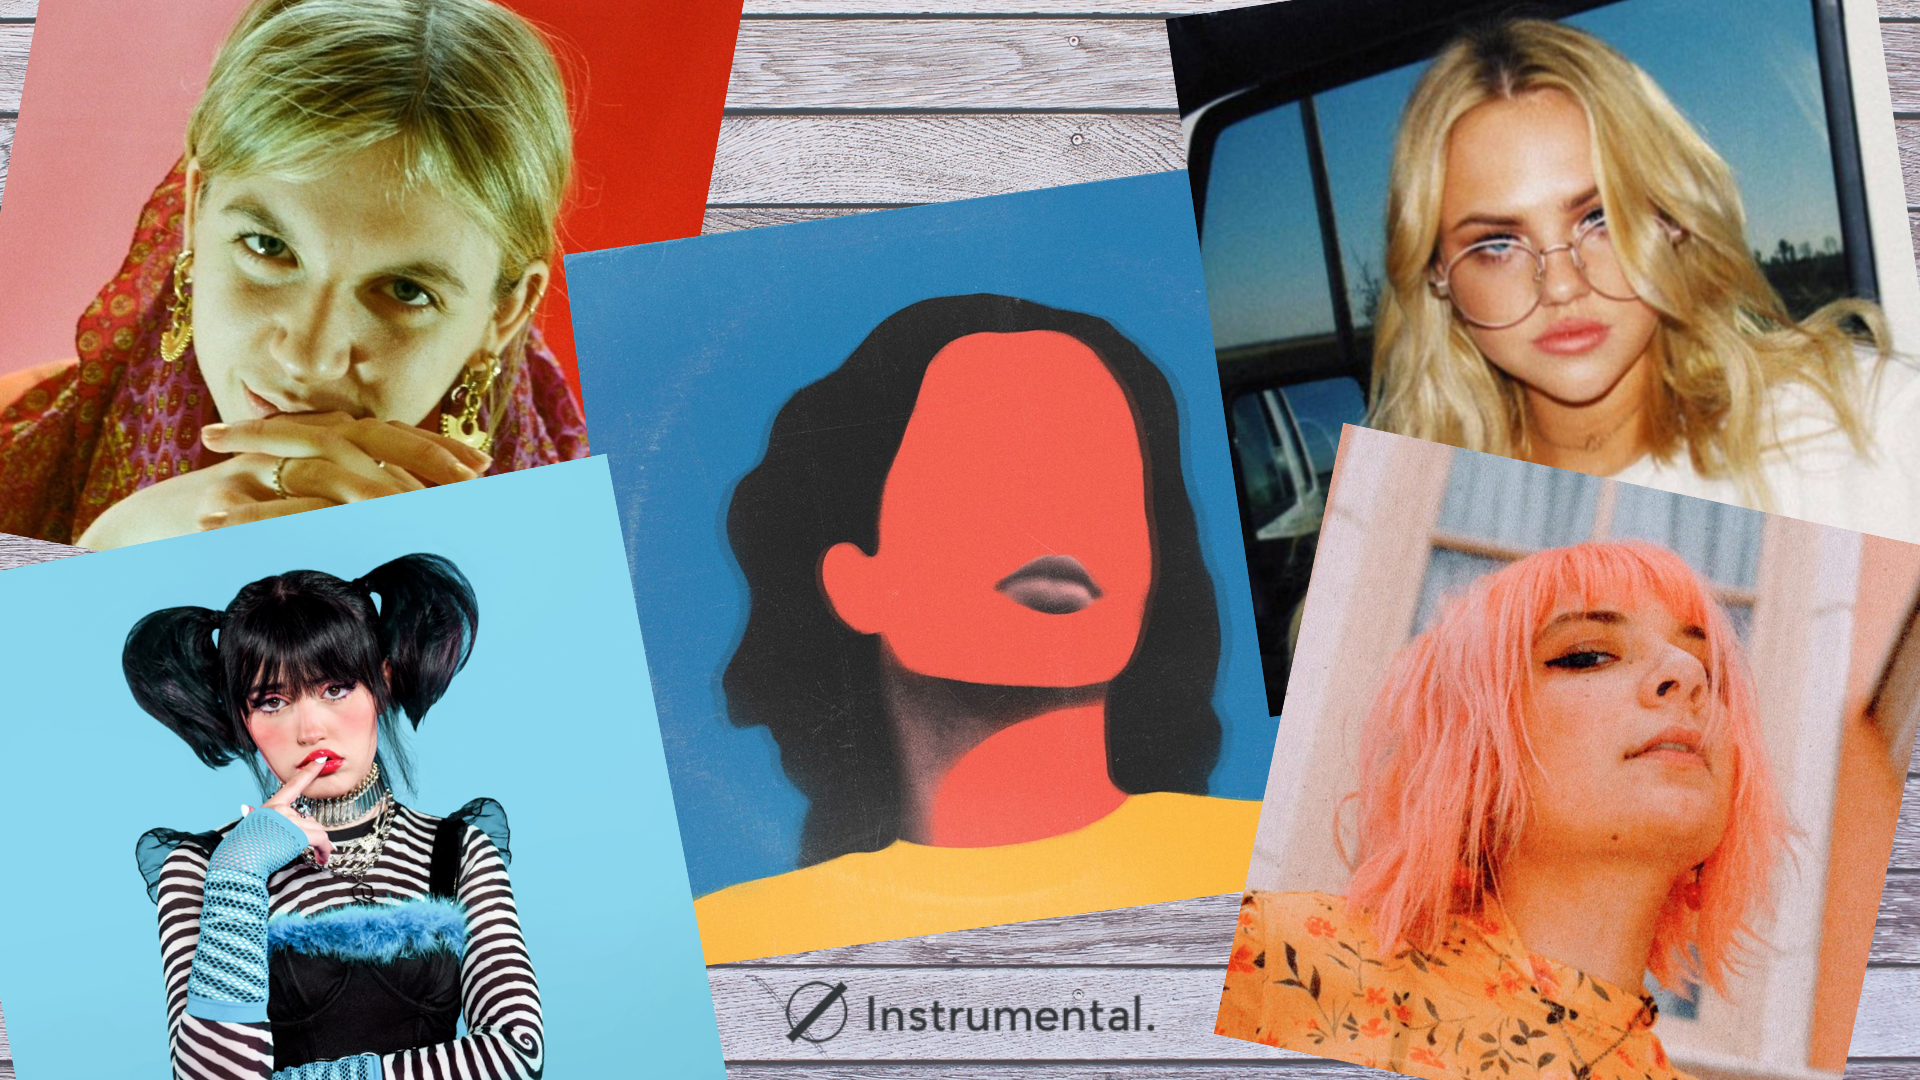 The Hottest Independent Artists In The World: Emilee, Maya Delilah, Mia ...